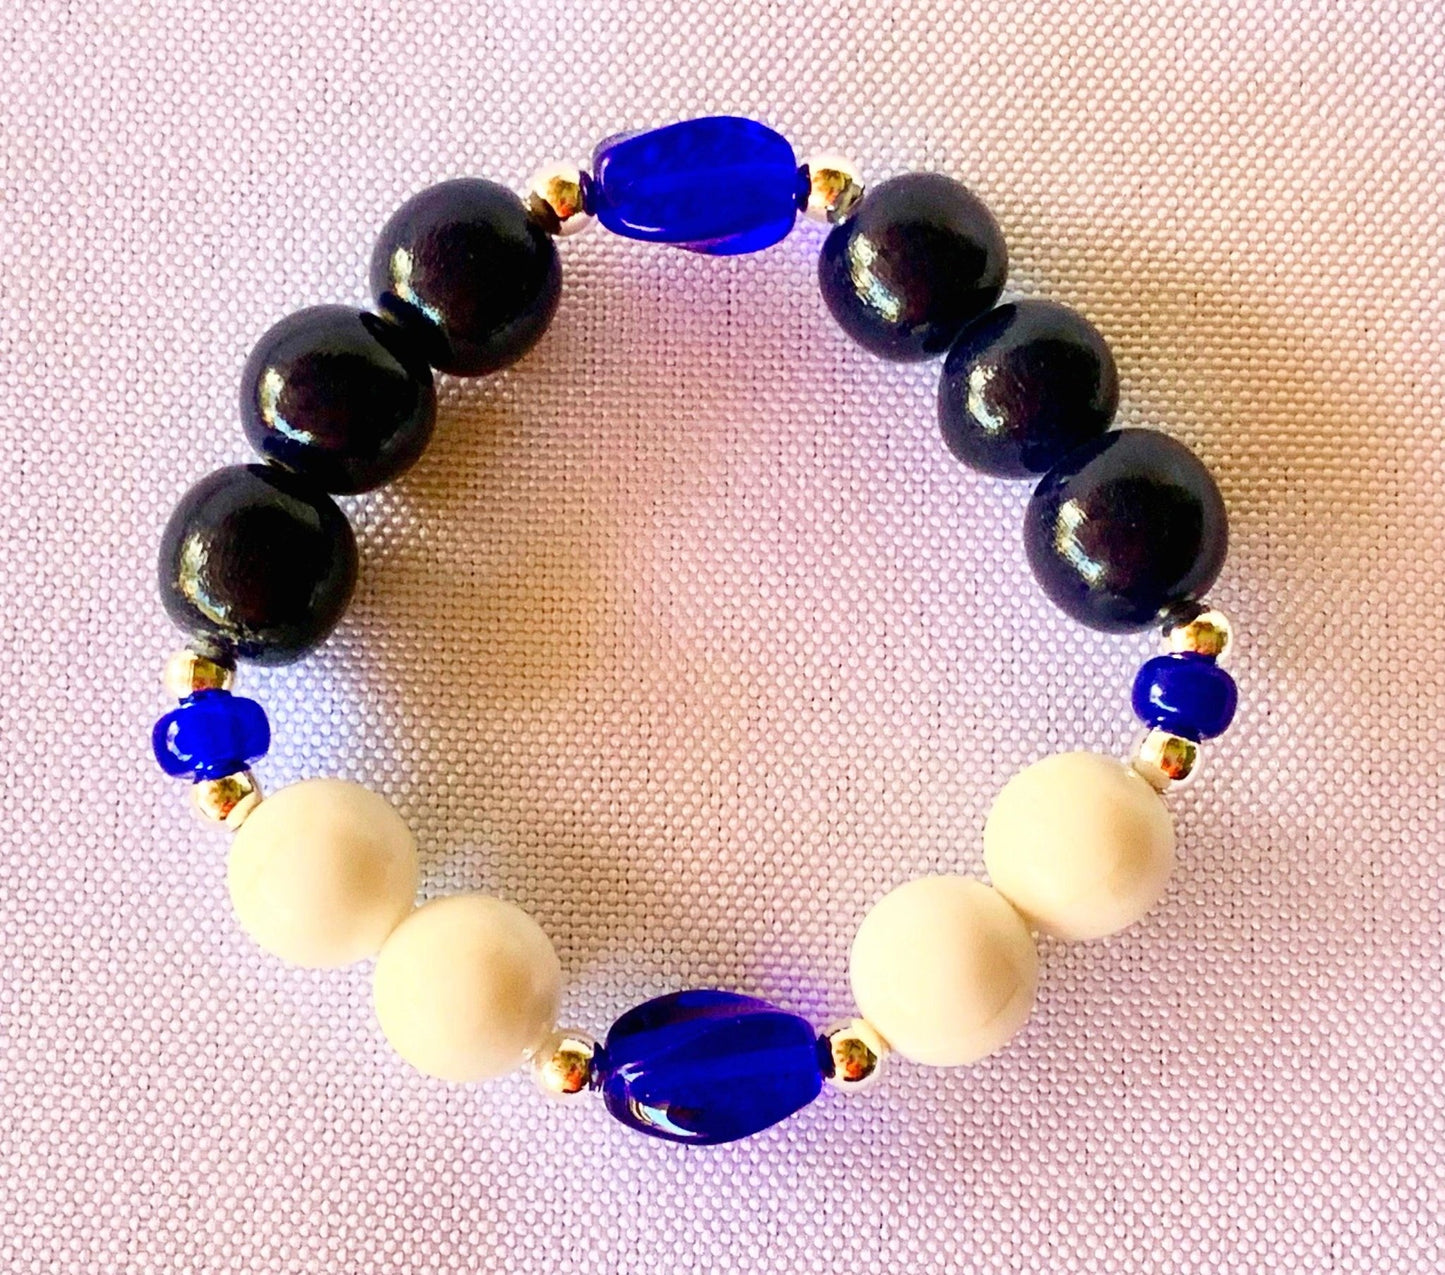 Roger Handmade Acrylic, Wood, and Glass Beaded Expandable 6" Bracelet for Kids 4-8 Years Old - Born Mystics